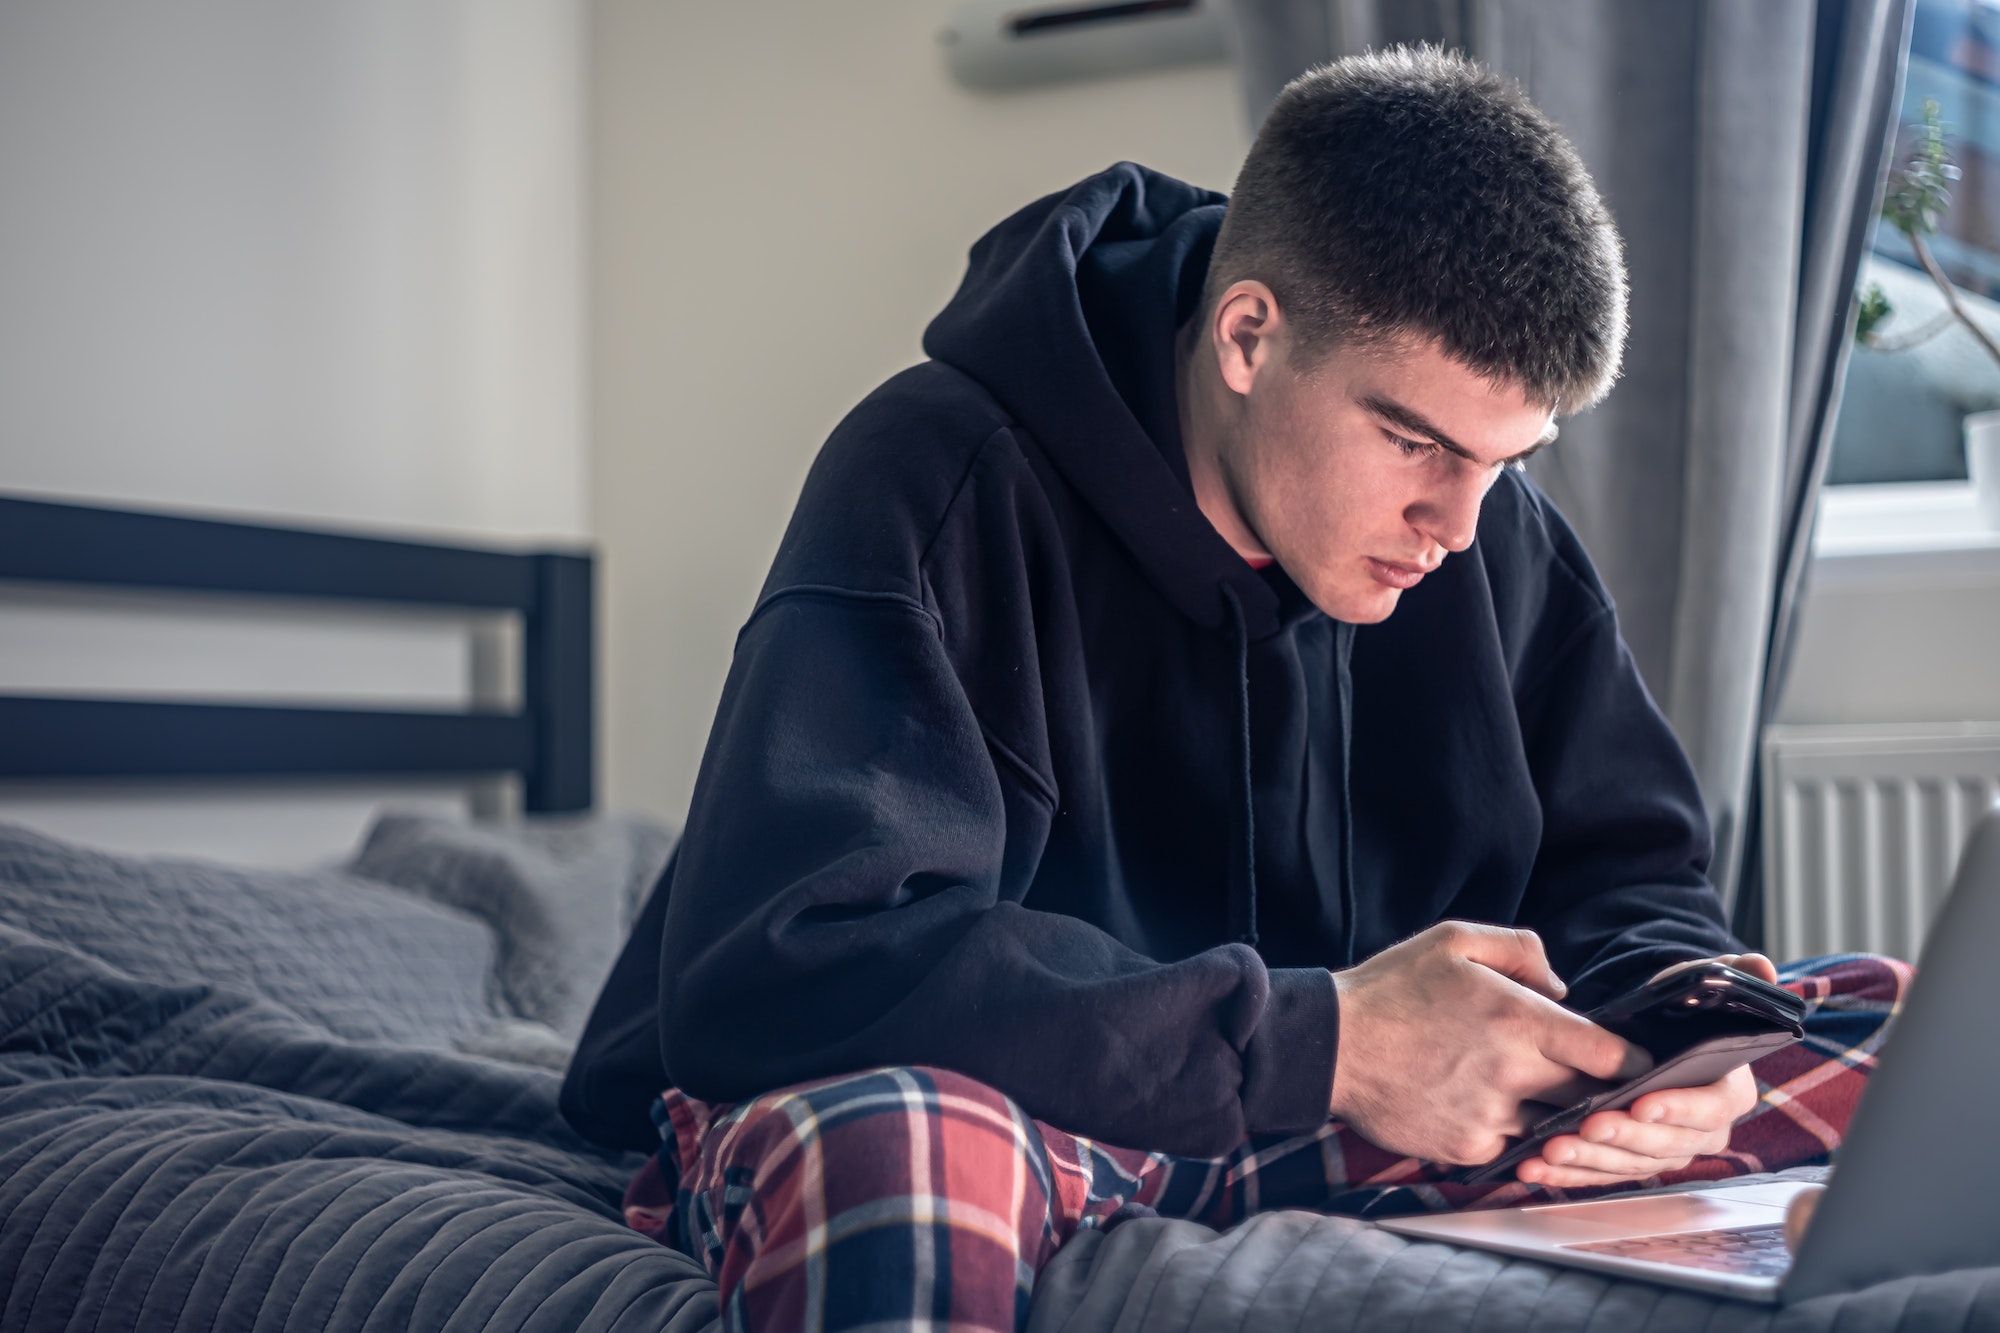 A teenager guy sits in a room on a bed and uses a laptop.